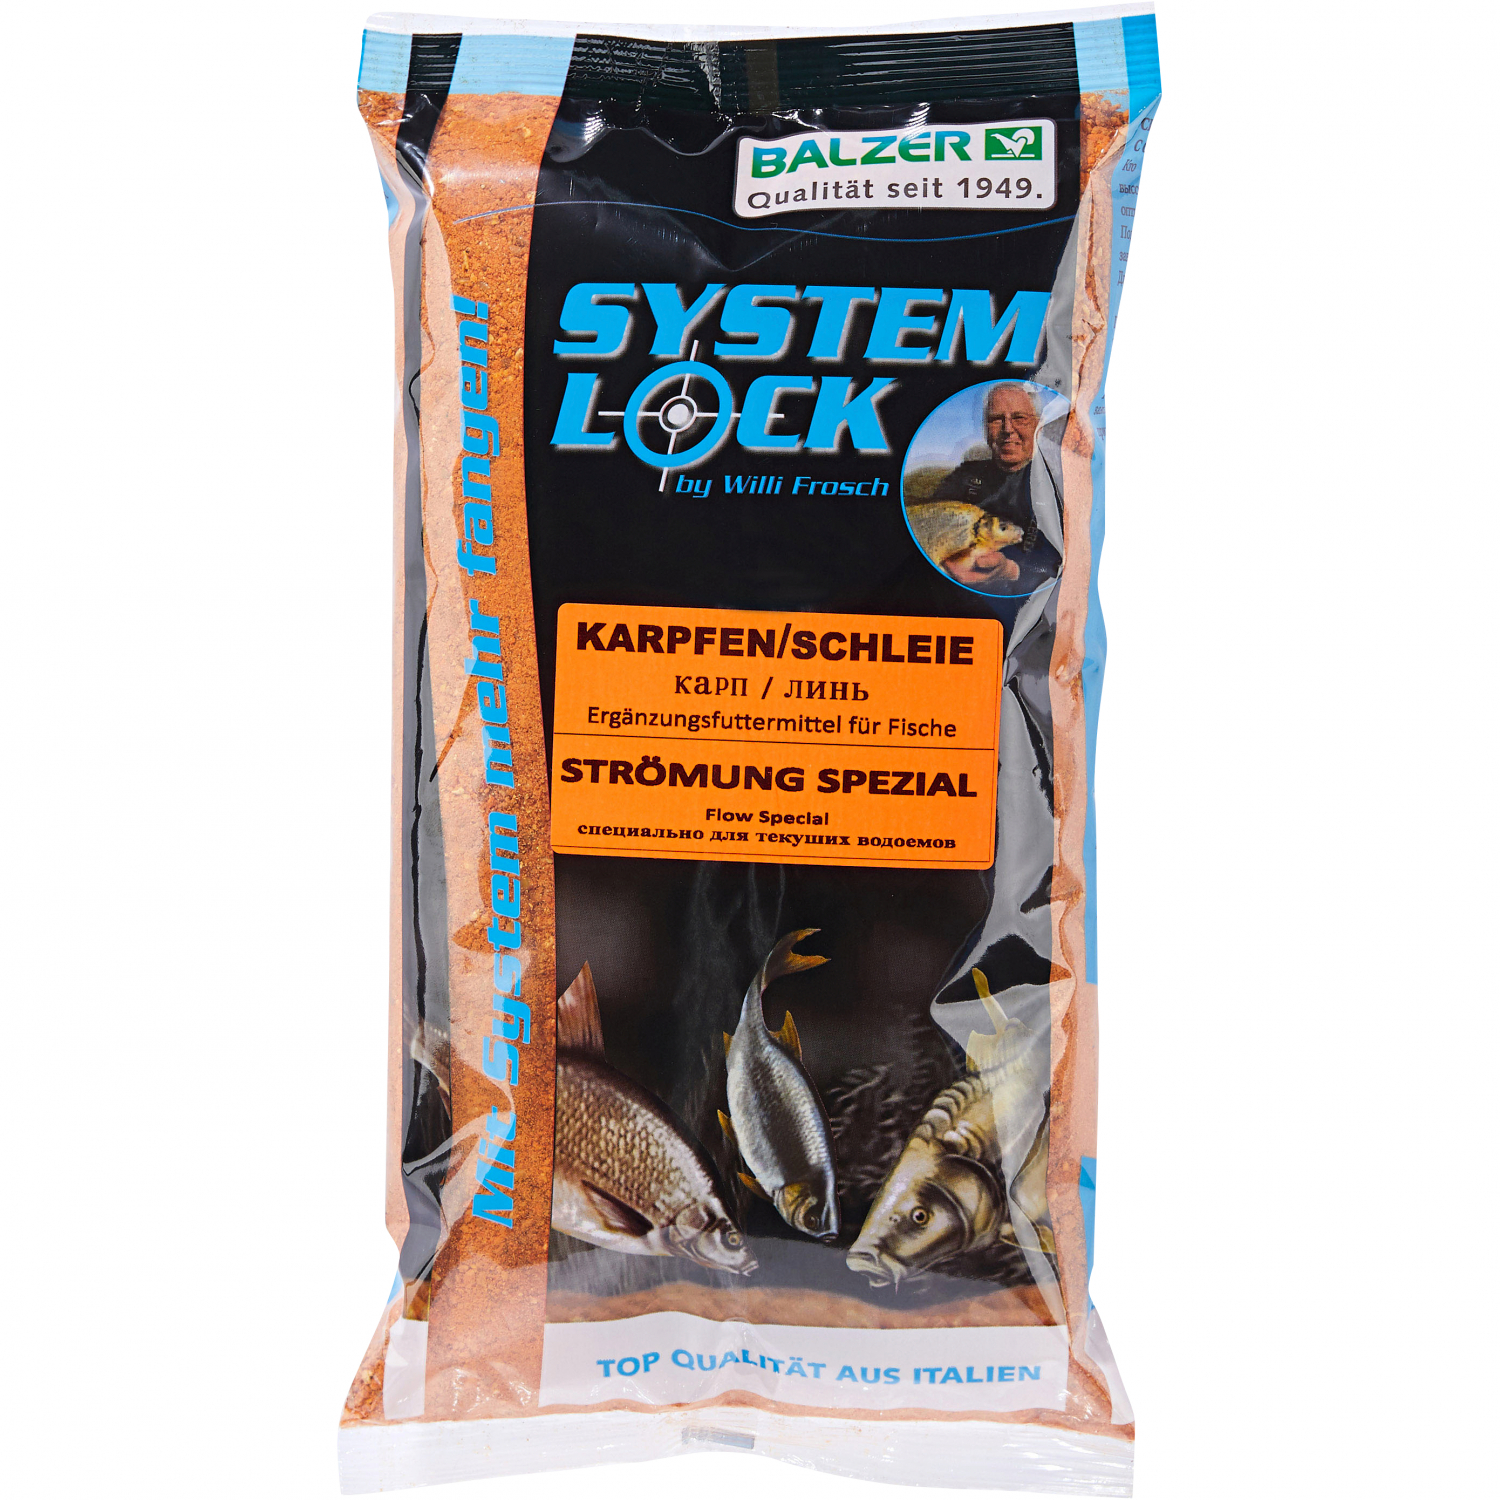 Balzer Feed System Lock Special at low prices